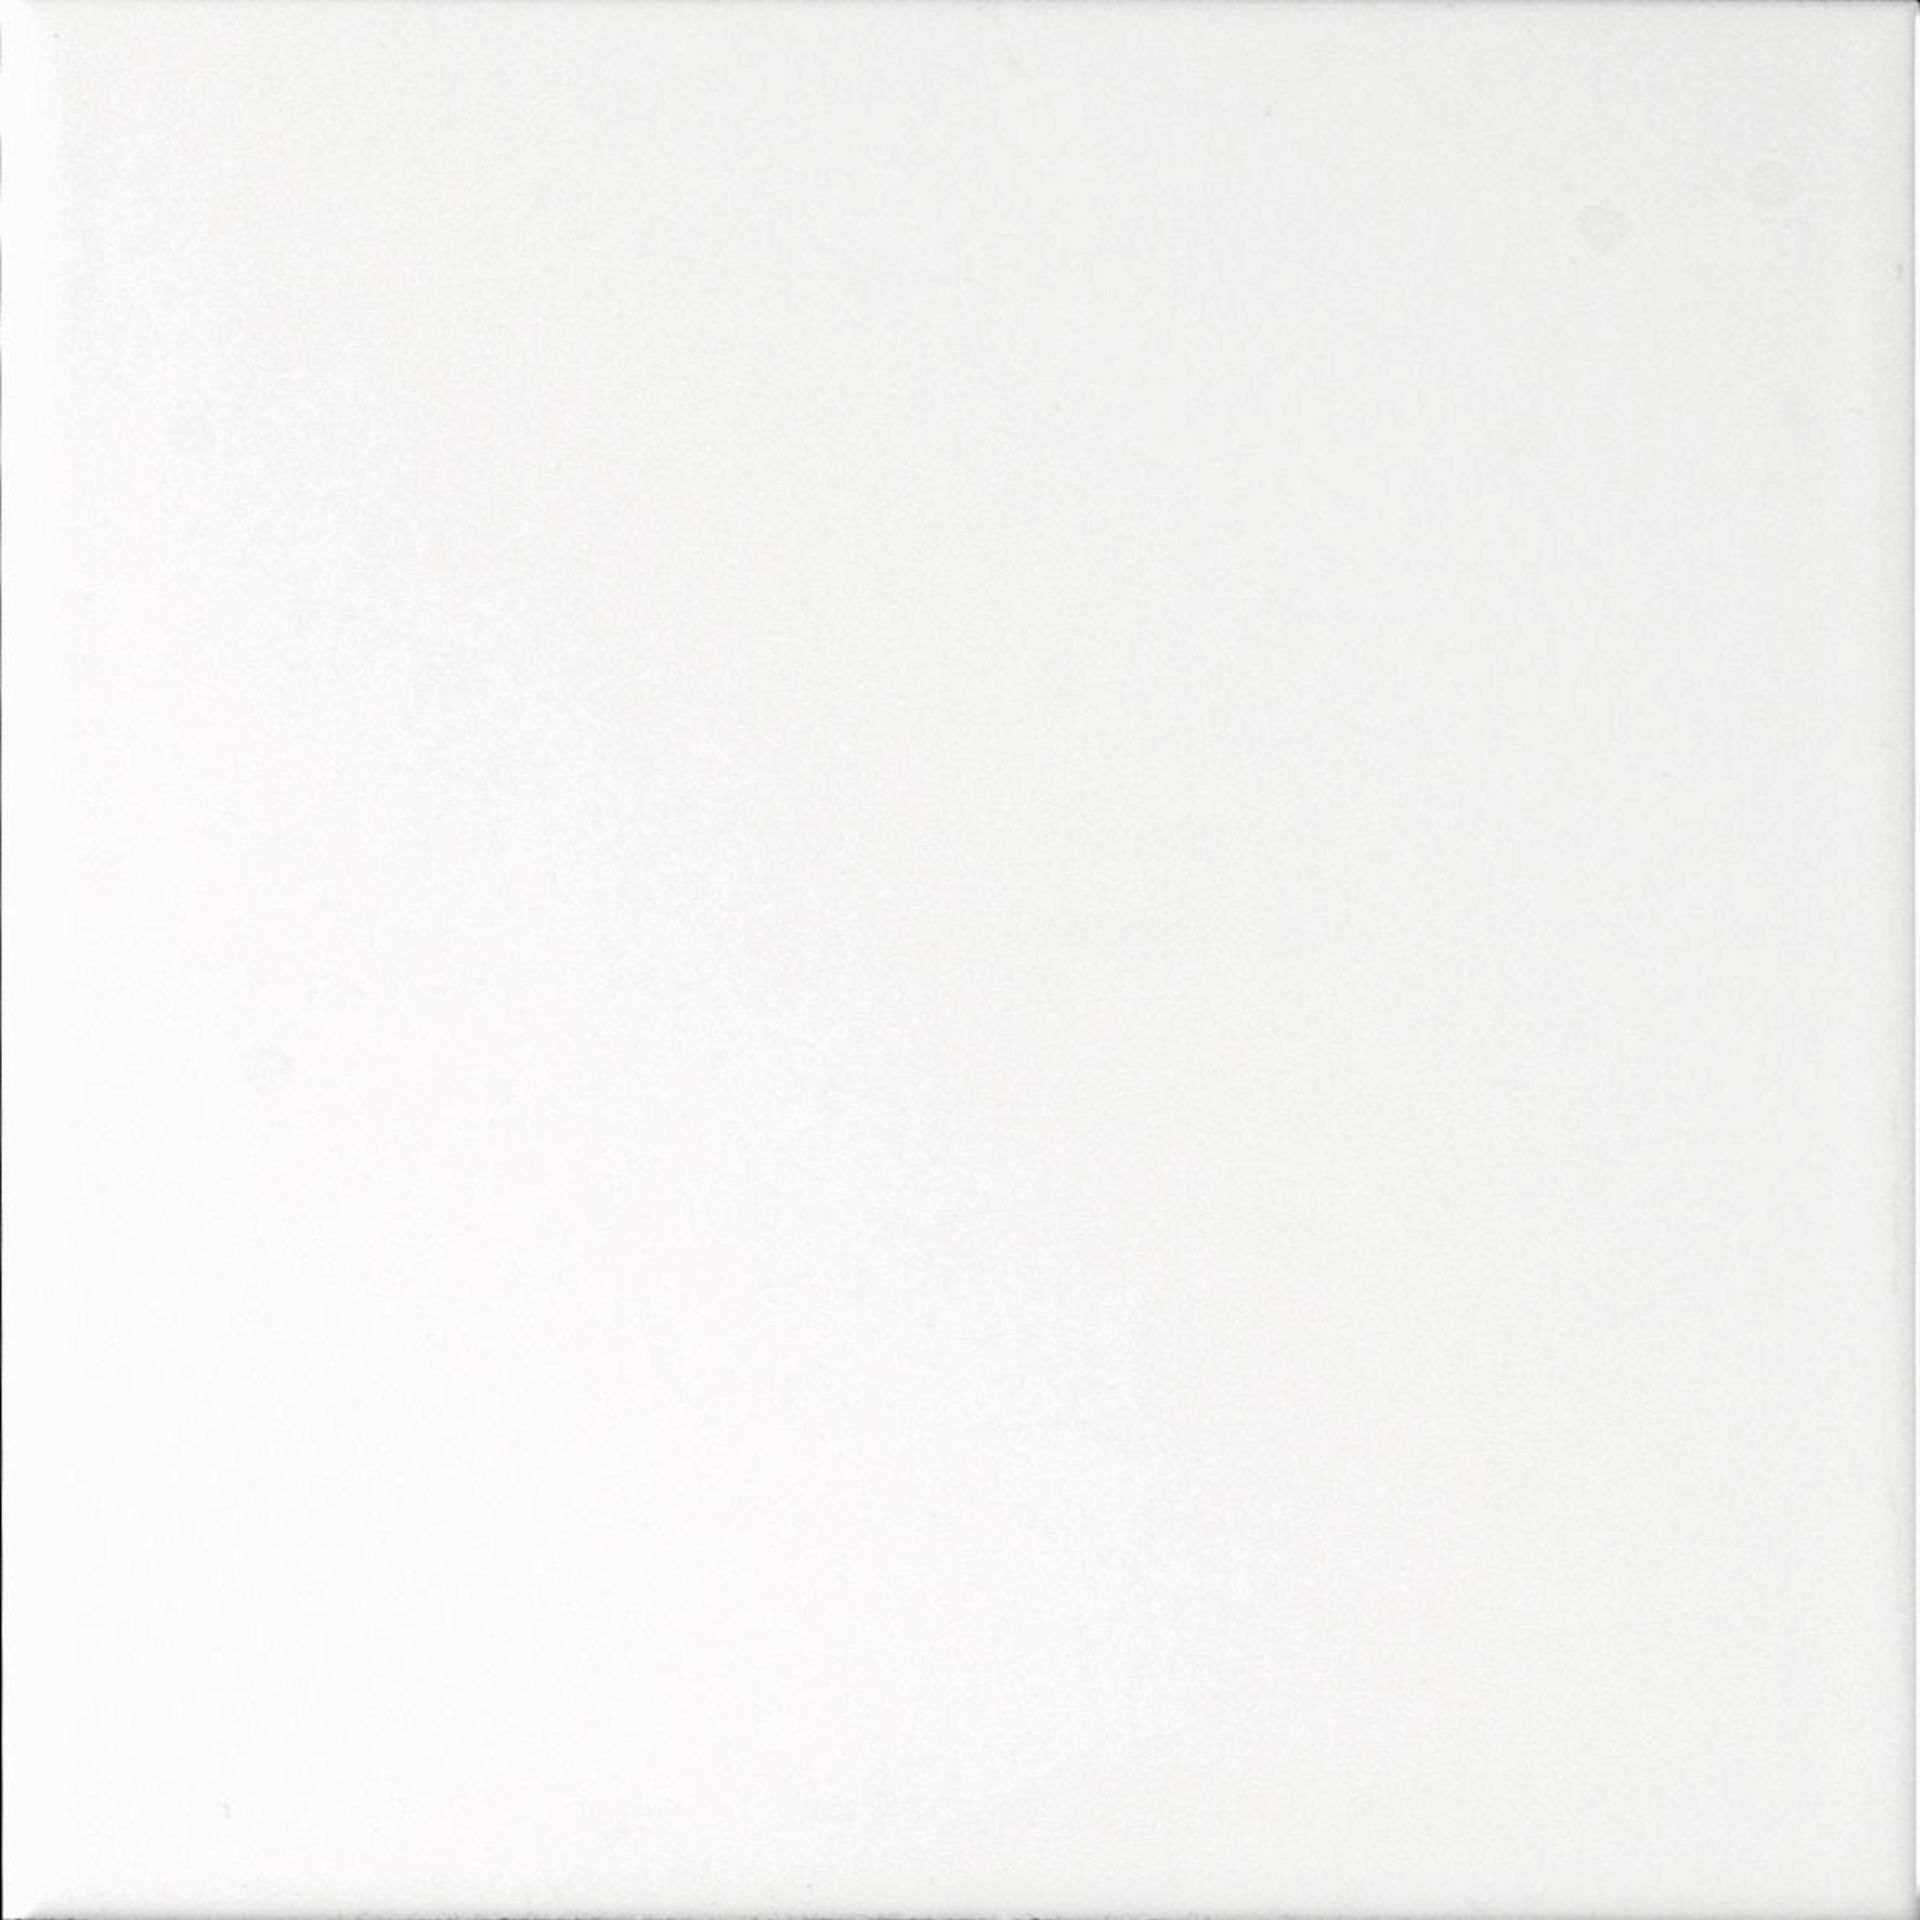 Brand New 6m2 150x150mm White Square Procelian Wall Tiles. White tiles are an essential product that - Image 4 of 5